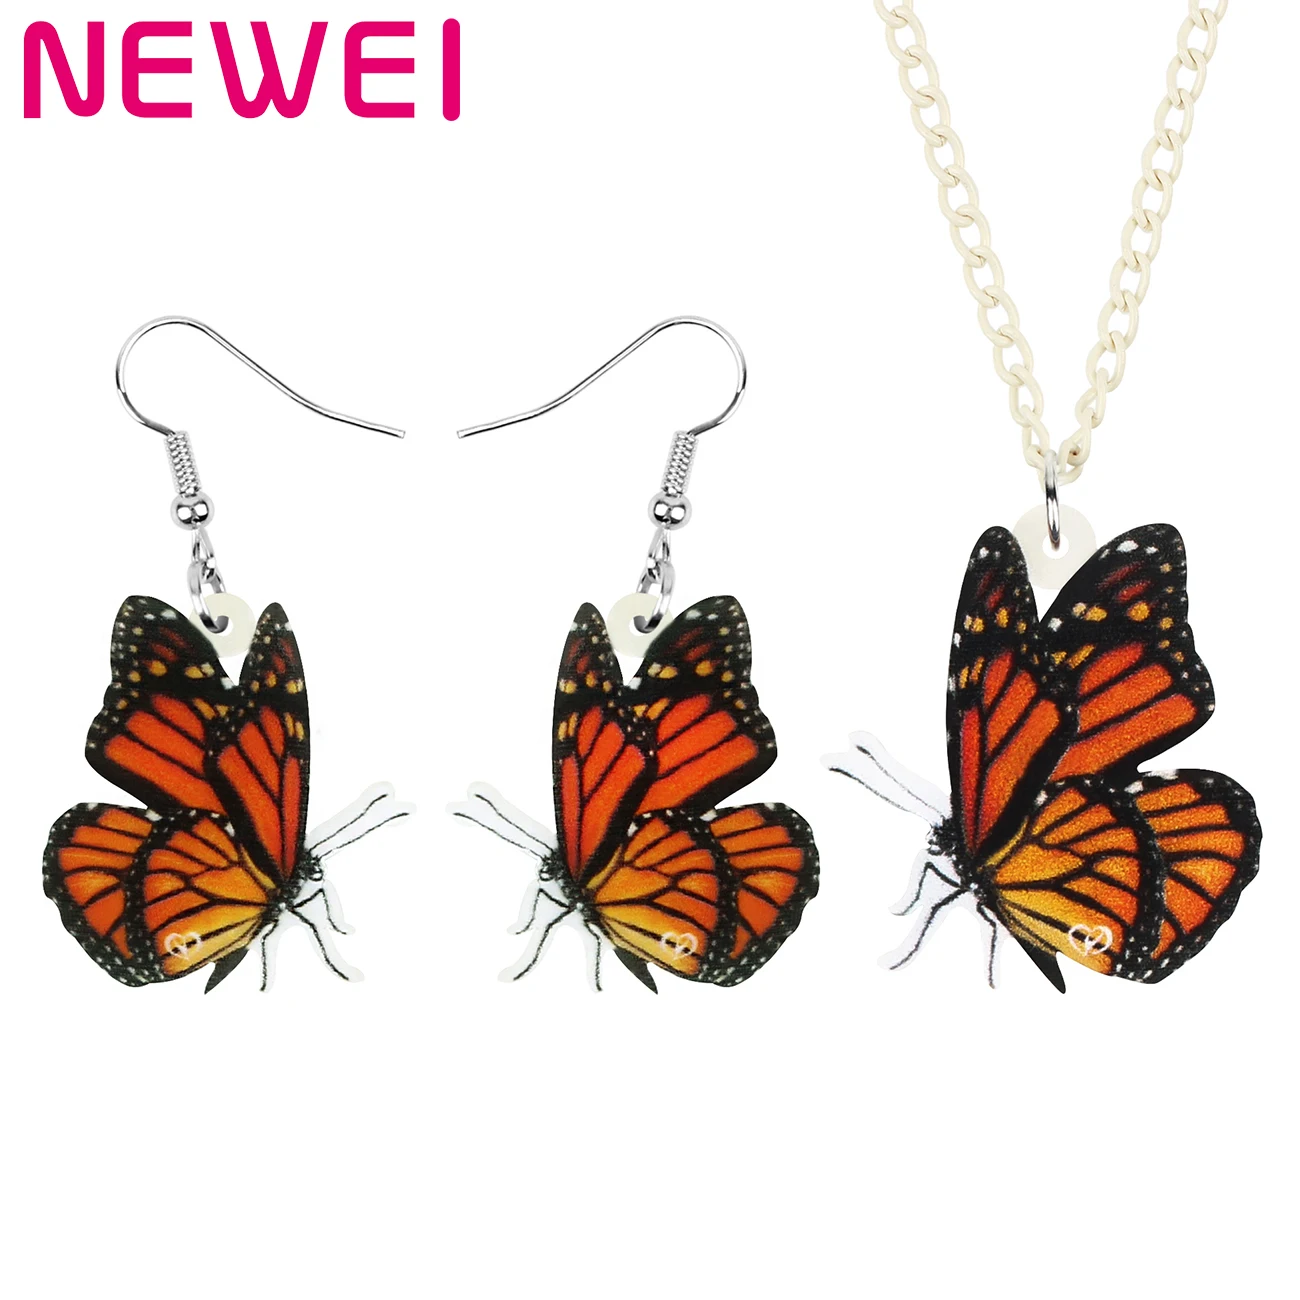 

Newei Acrylic Monarch Butterfly Jewelry Sets Long Lovely Animal Insect Necklace Earrings For Women Girls Kids Gifts Jewellery